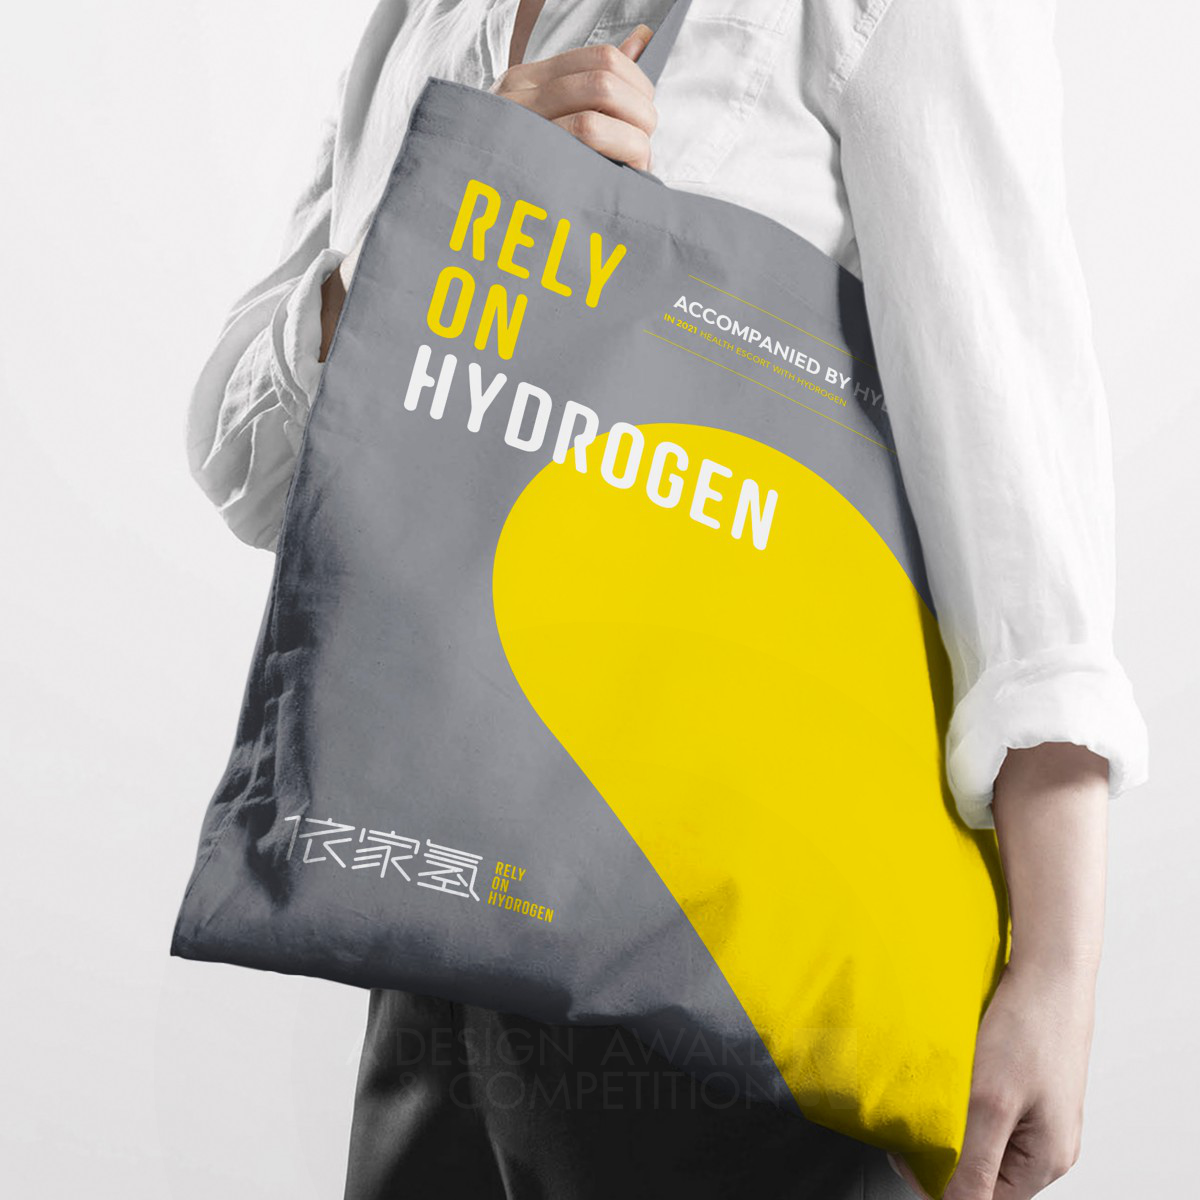 Rely on Hydrogen <b>Corporate Identity